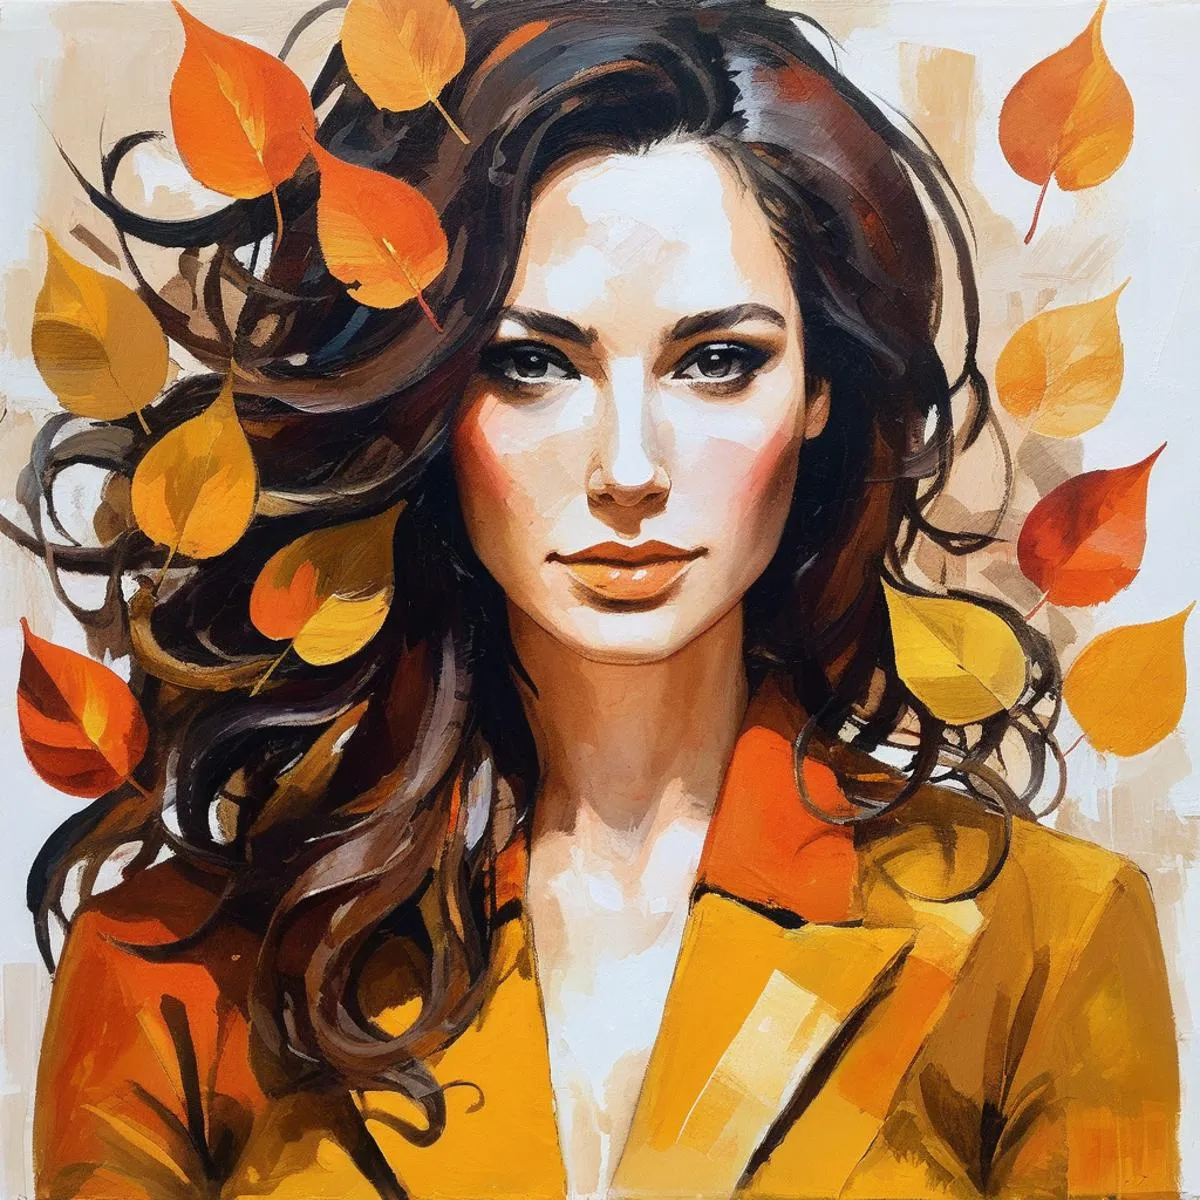 AI generated image of a woman with long brown hair surrounded by fall leaves, wearing an orange and yellow outfit using stable diffusion